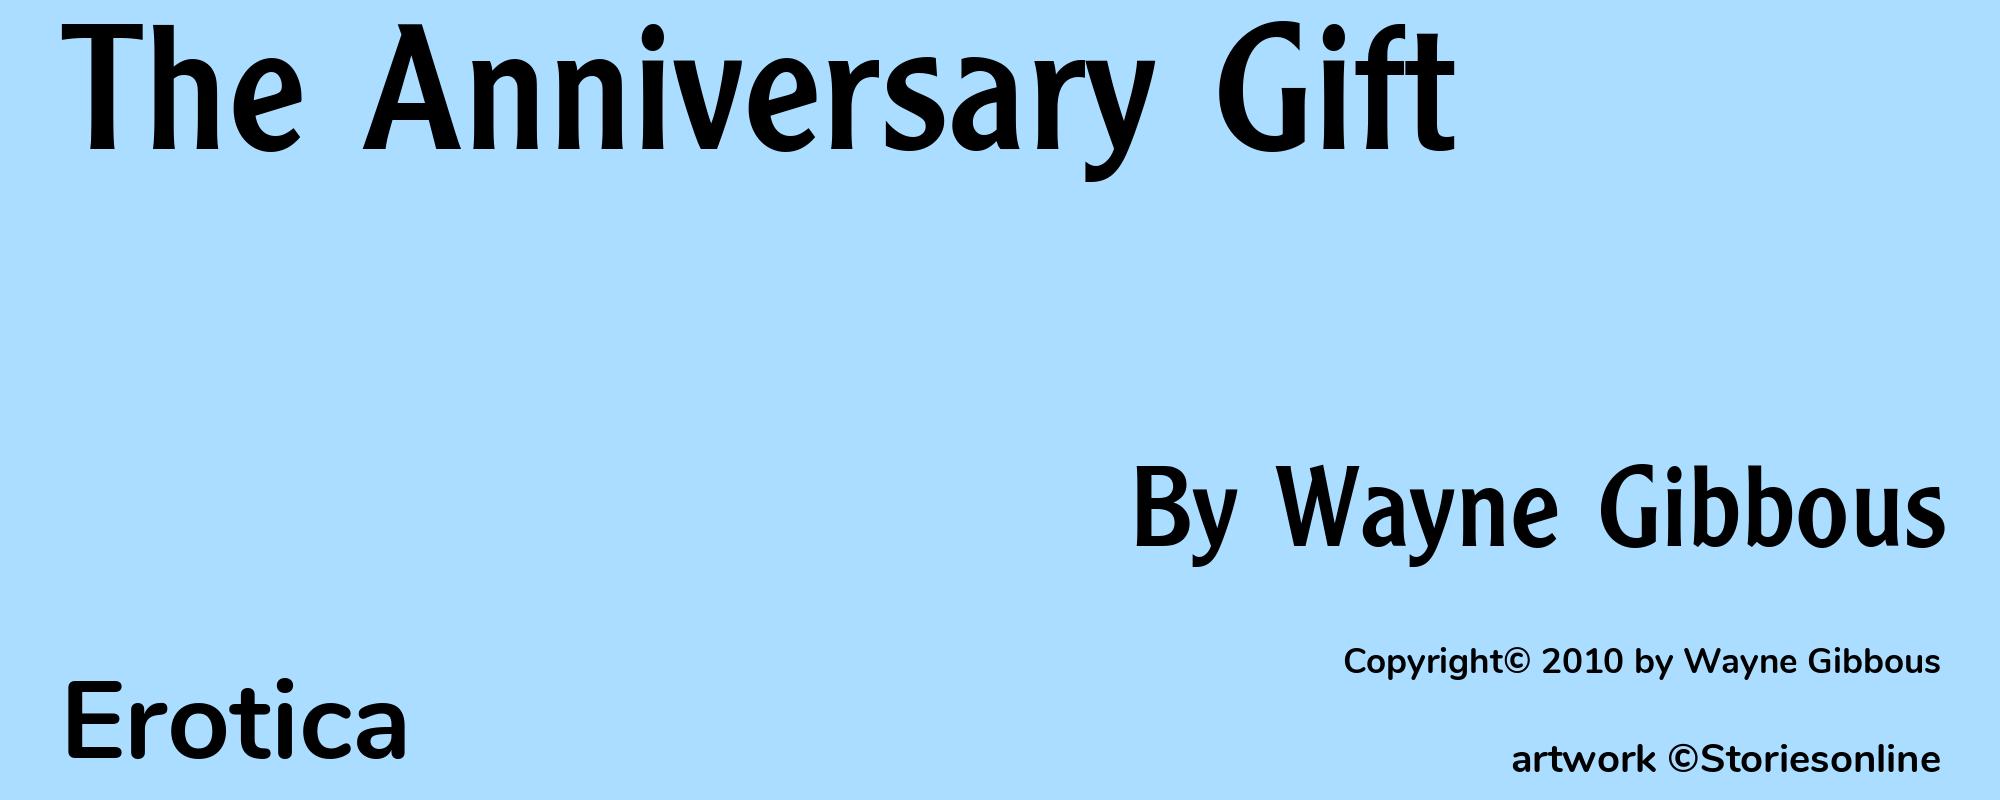 The Anniversary Gift - Cover